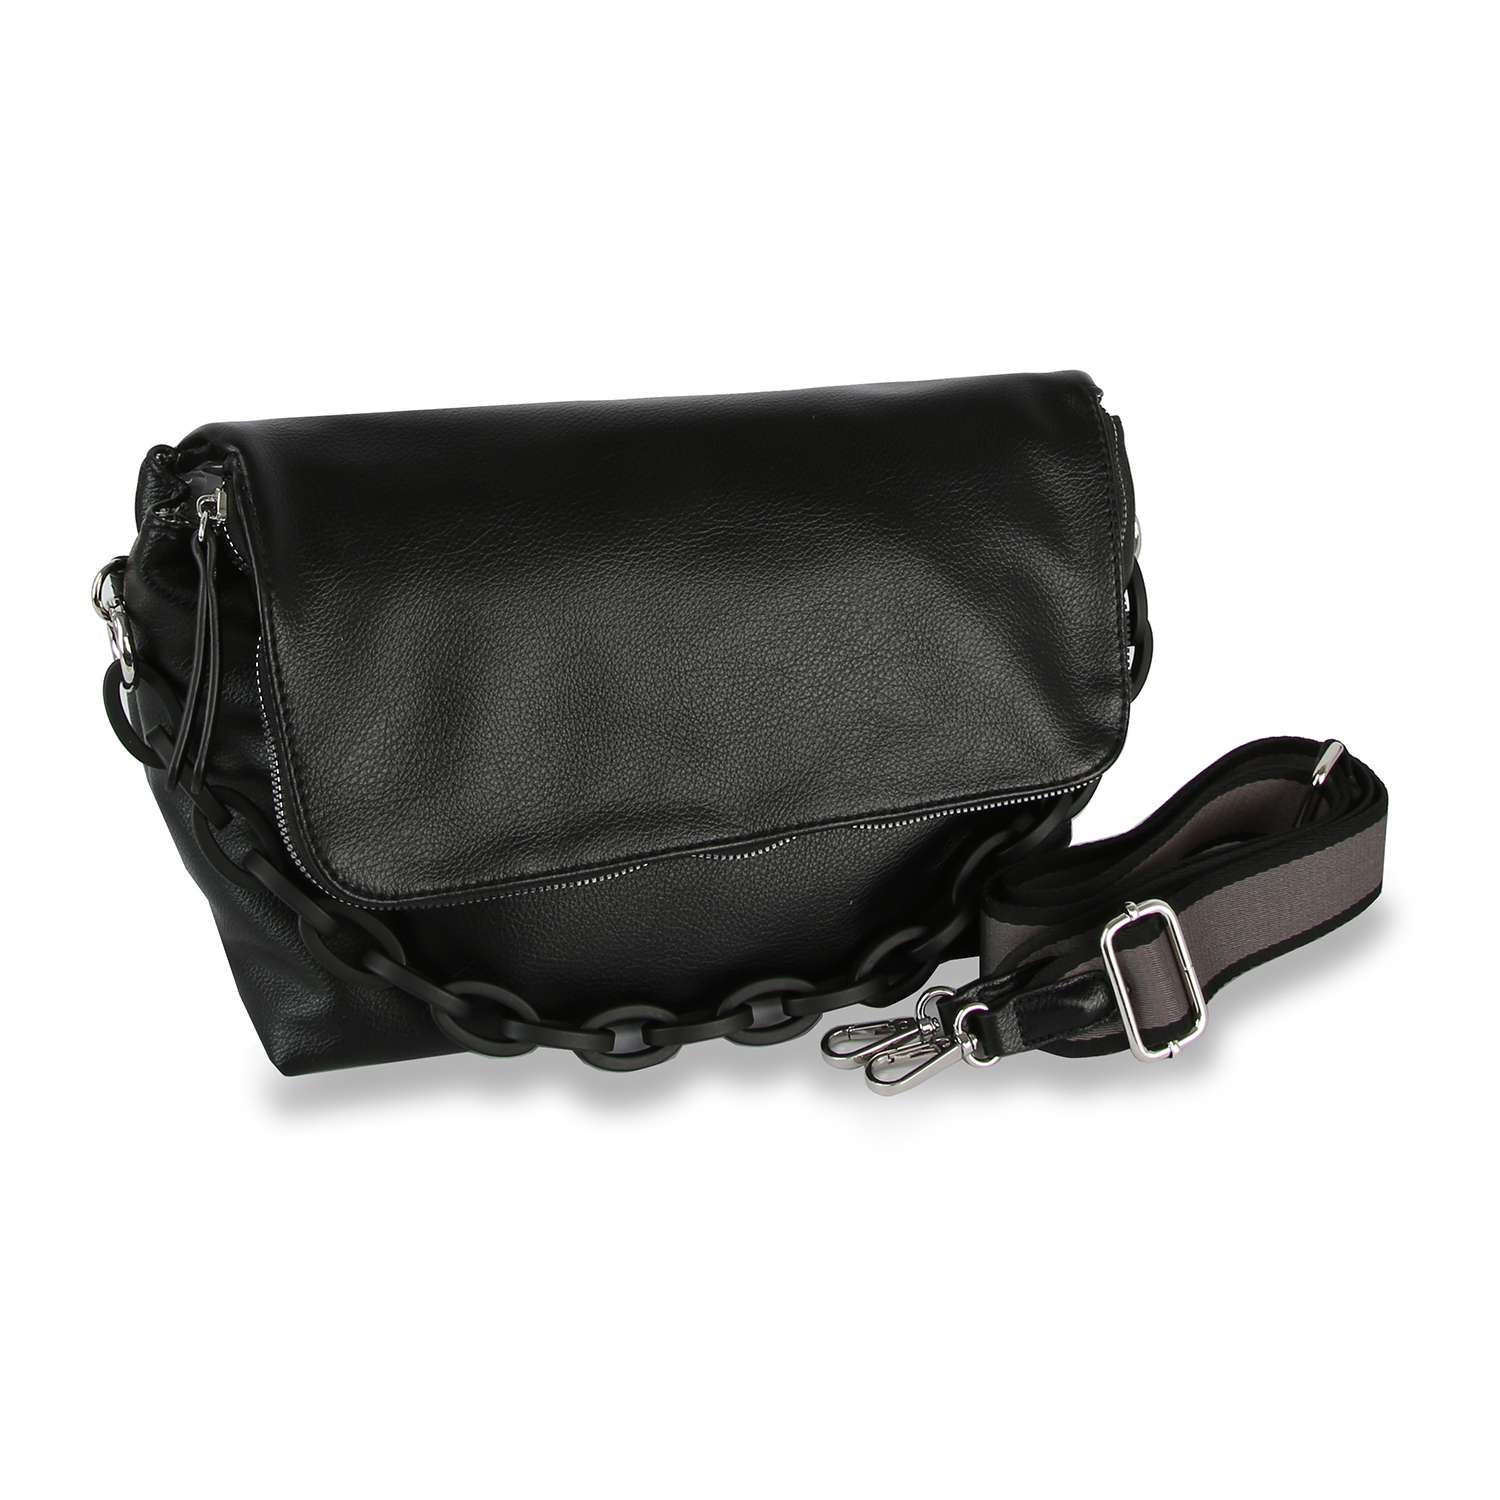 Courtney  Olive Chain Handle Shoulder Bag: Olive - Coco and lulu boutique 